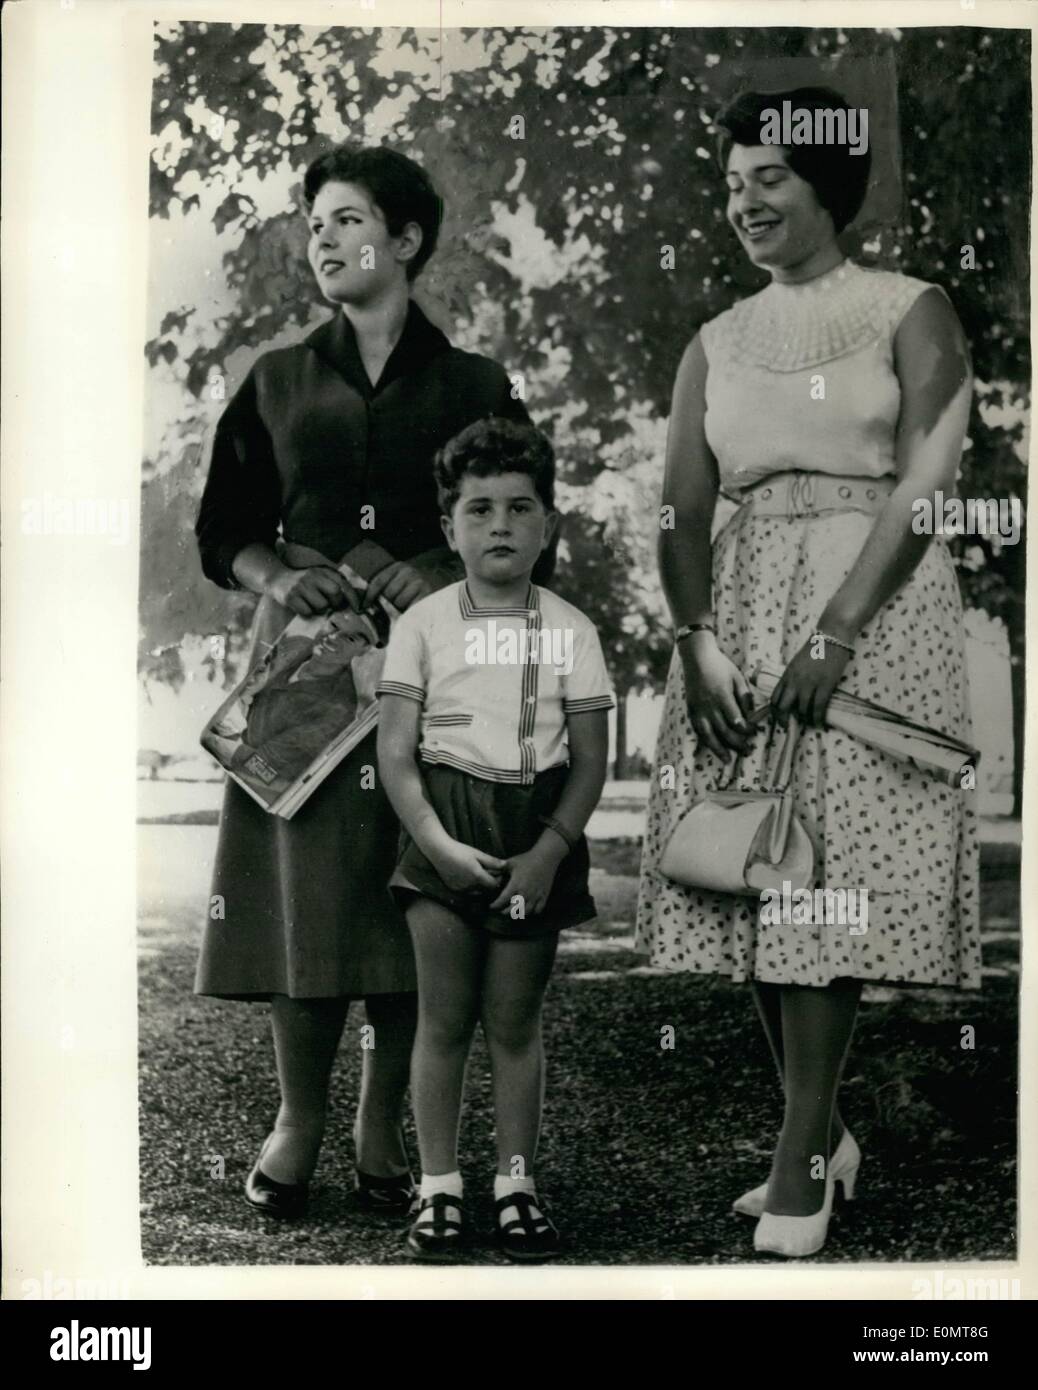 Aug. 08, 1956 - Constant watch is kept over you to Prince Fuad - son of Ex-king Farouk of Egypt; Well guarded against s attack by possible fanatics is four year old Prince Faud young son of Ex-King Farouk of Egypt. The young Prince lives in a villa on the shores of Lake Geneva with his English Nurse 40 year old Miss Anne Chemaide and an Albanian Bodyguard Abdul Rostum. The young Prince is never allwoed outside the 10 ft high walls of the Villa alone and nobody is allowed in the ground without permission of Miss Chermaide Stock Photo